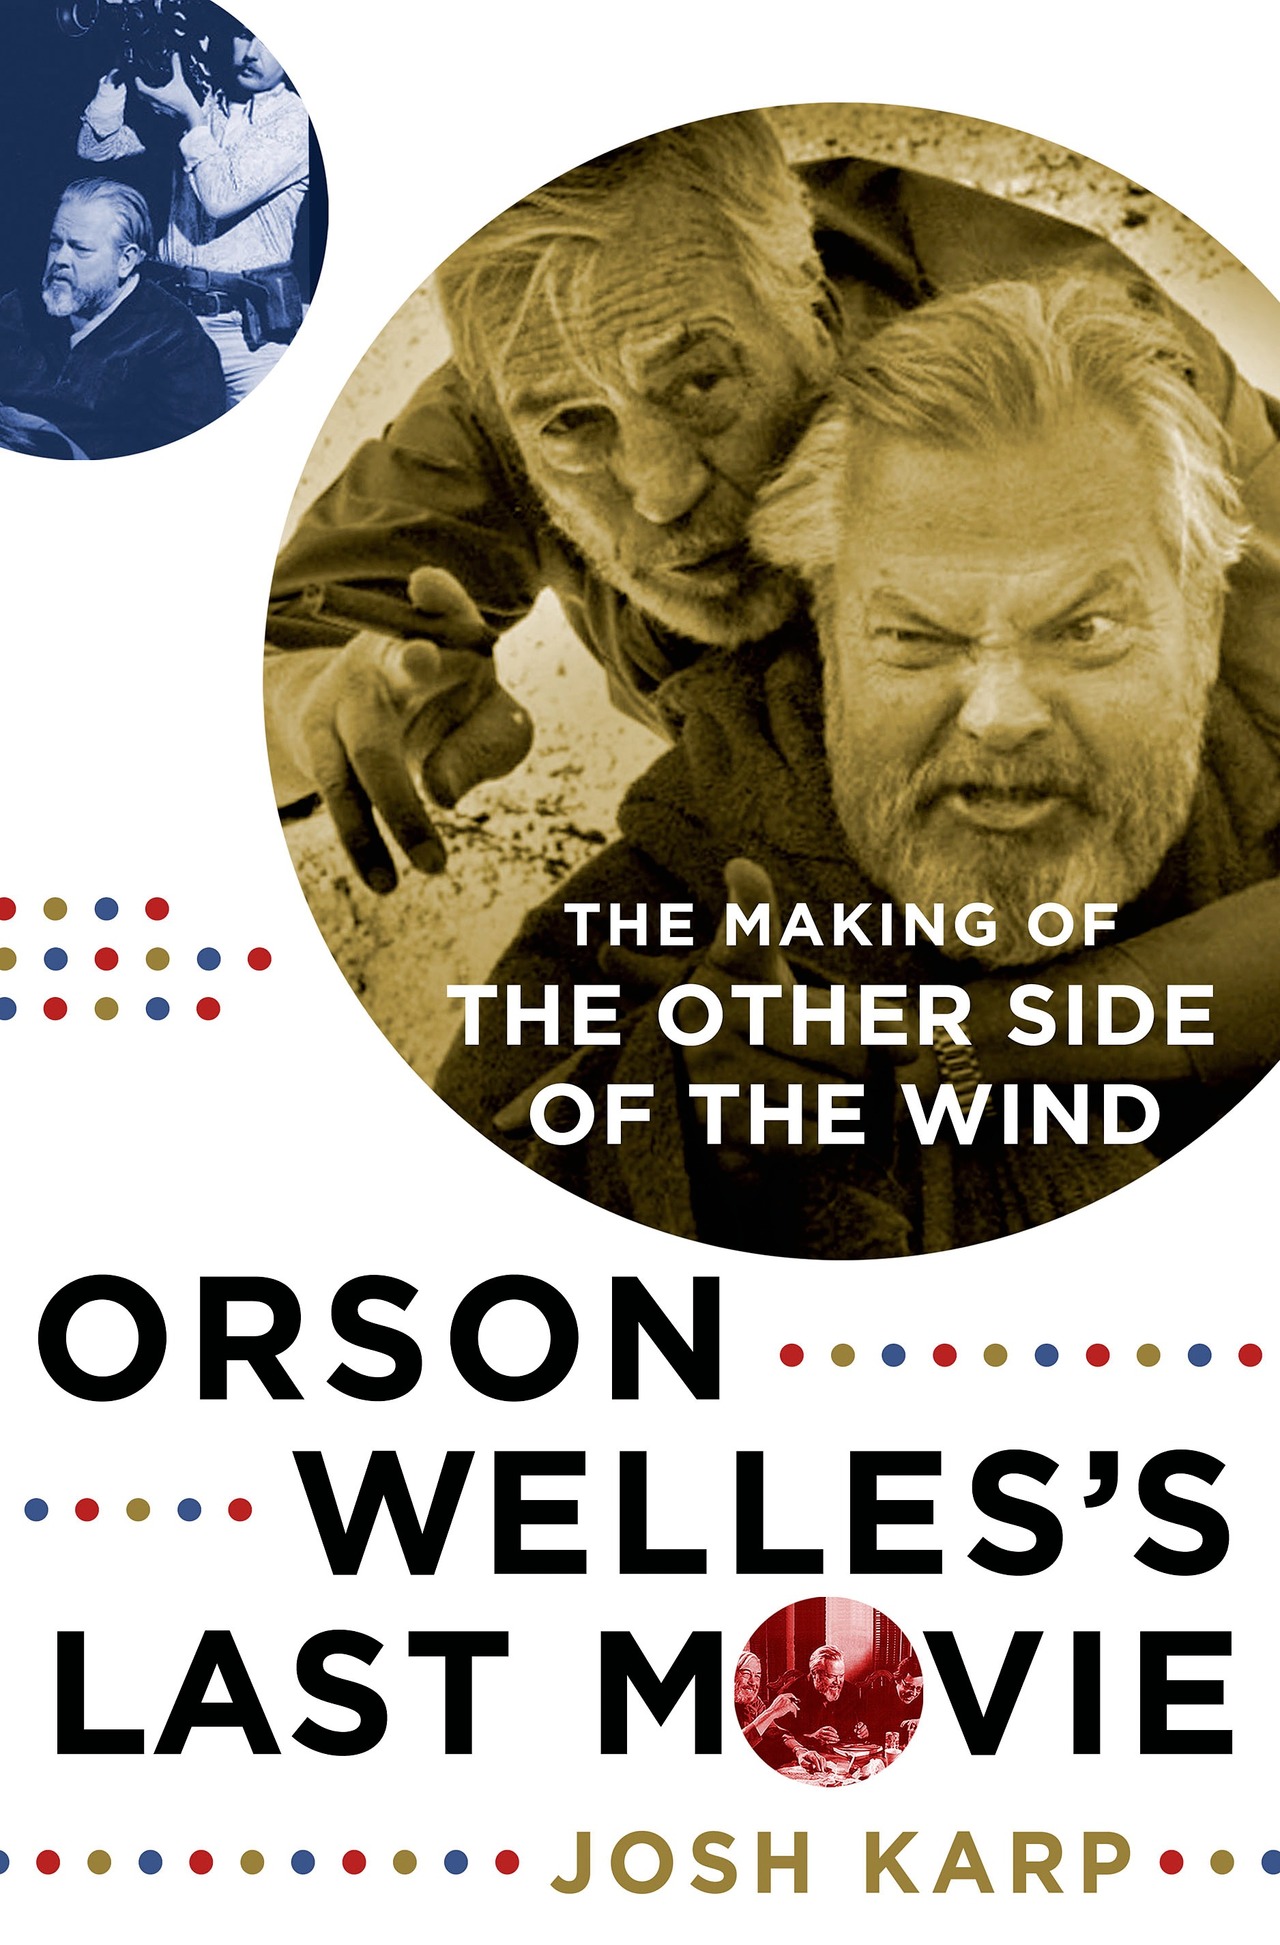 ORSON WELLES'S LAST MOVIE: THE MAKING OF THE OTHER SIDE OF THE WIND, by Josh Karp